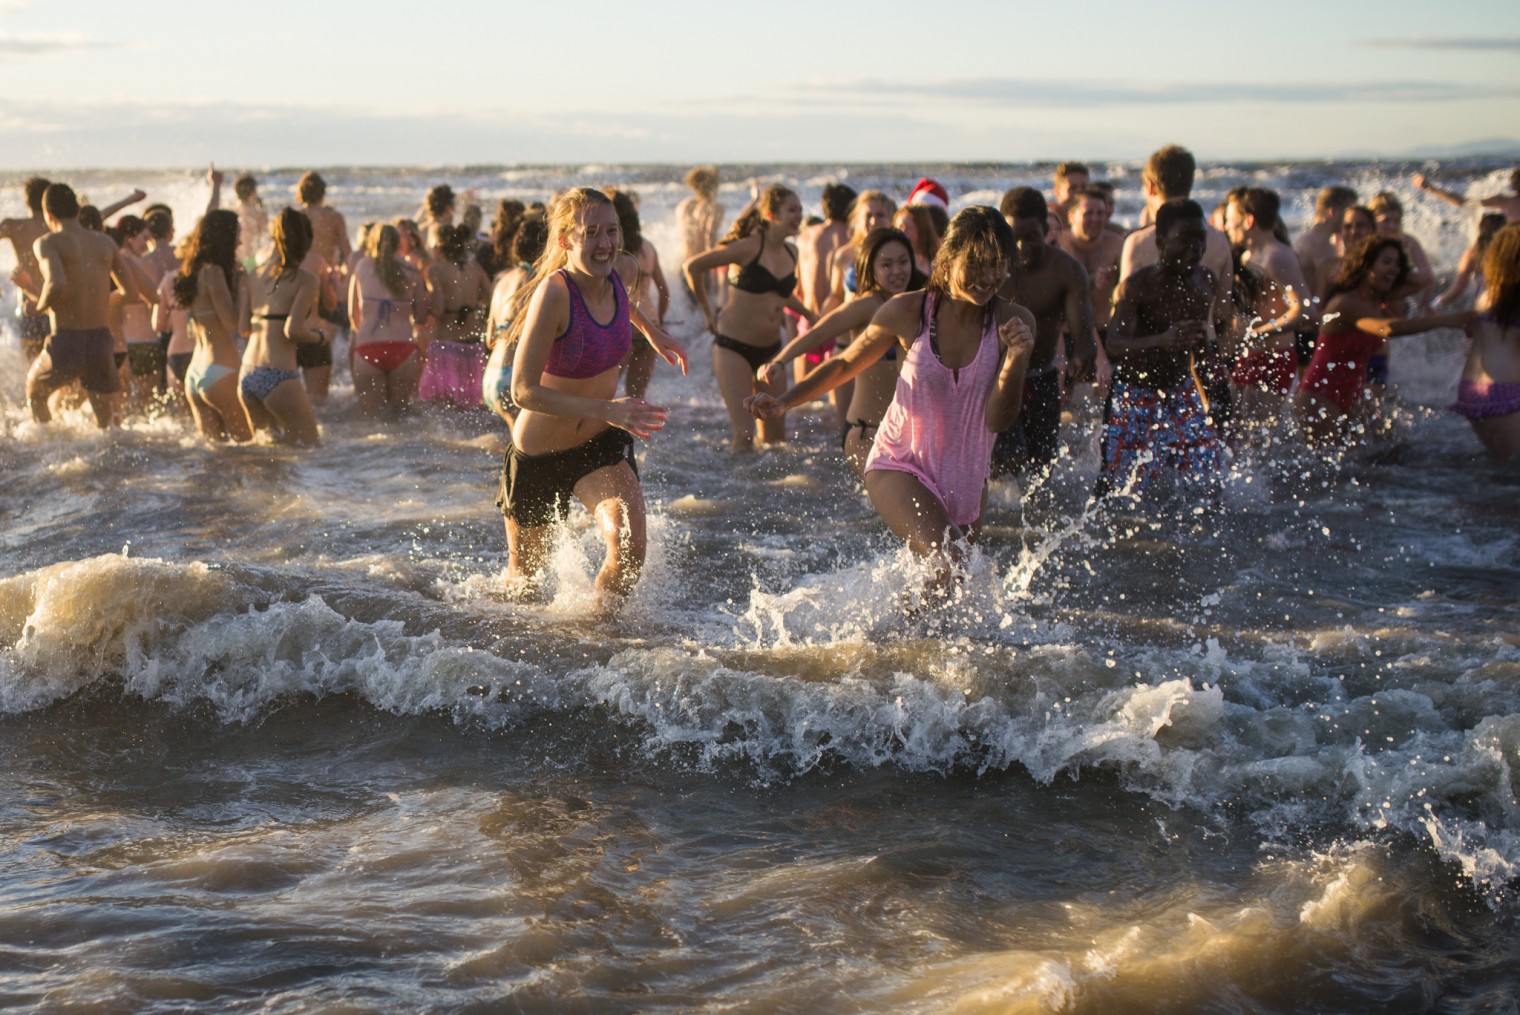 Students run out of the cold ocean water during the Polar Bear Swim at Wreck Beach 